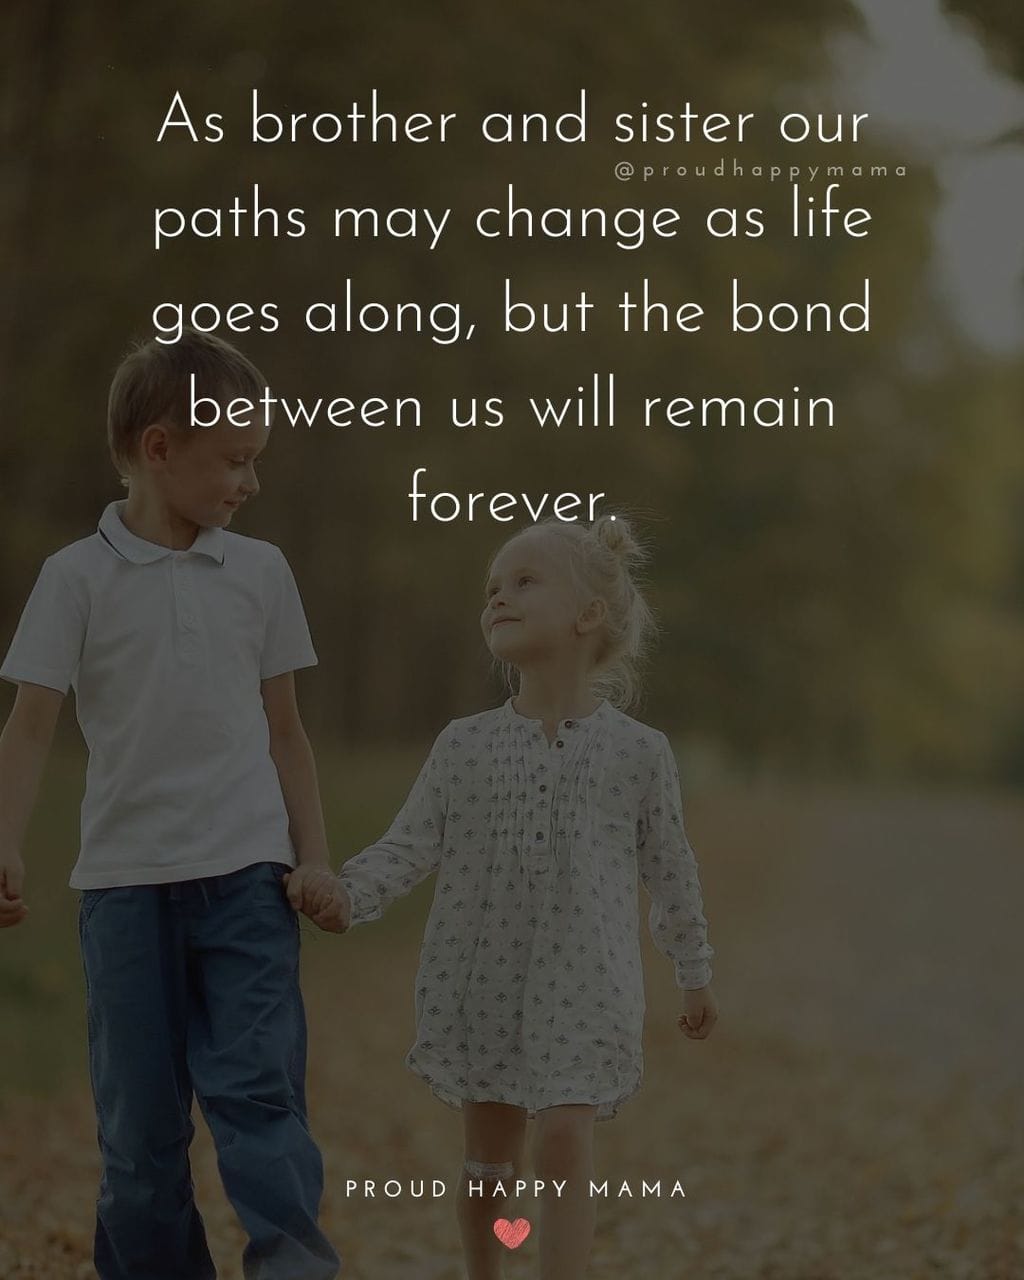 Brother And Sister Quotes - As brother and sister our paths may change as life goes along, but the bond between us will remain forever.